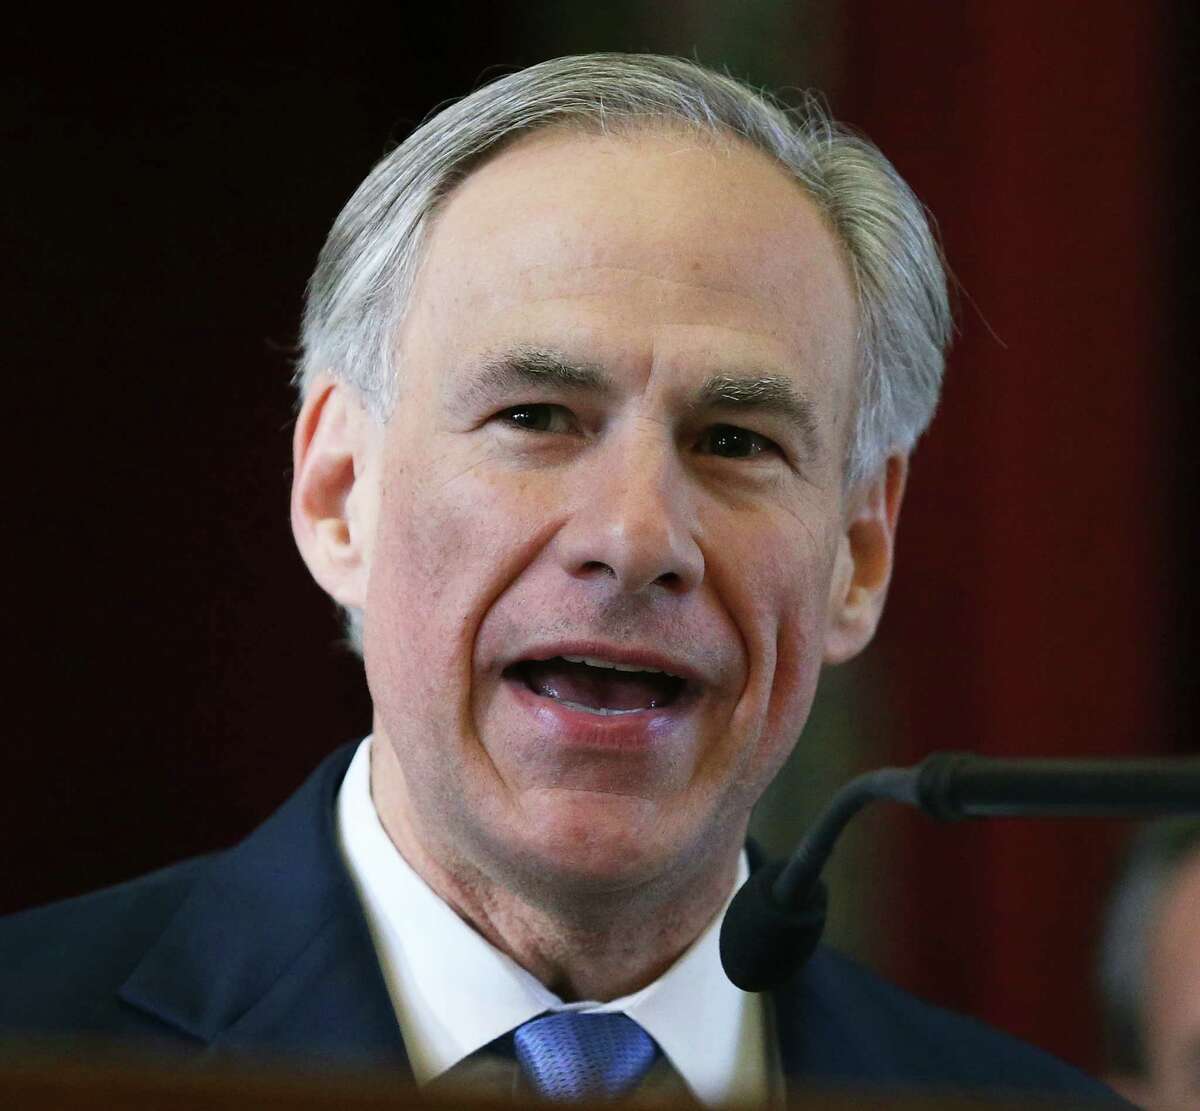 Funding to Travis County cut off by Gov. Greg Abbott. Texas Gov. Greg Abbott announced on Feb. 1, 2017 that he's cutting off funding to the Travis County DA's office because of it's "sanctuary city" policy. >>>Click through the gallery to see what cities have declared themselves "sanctuary cities."